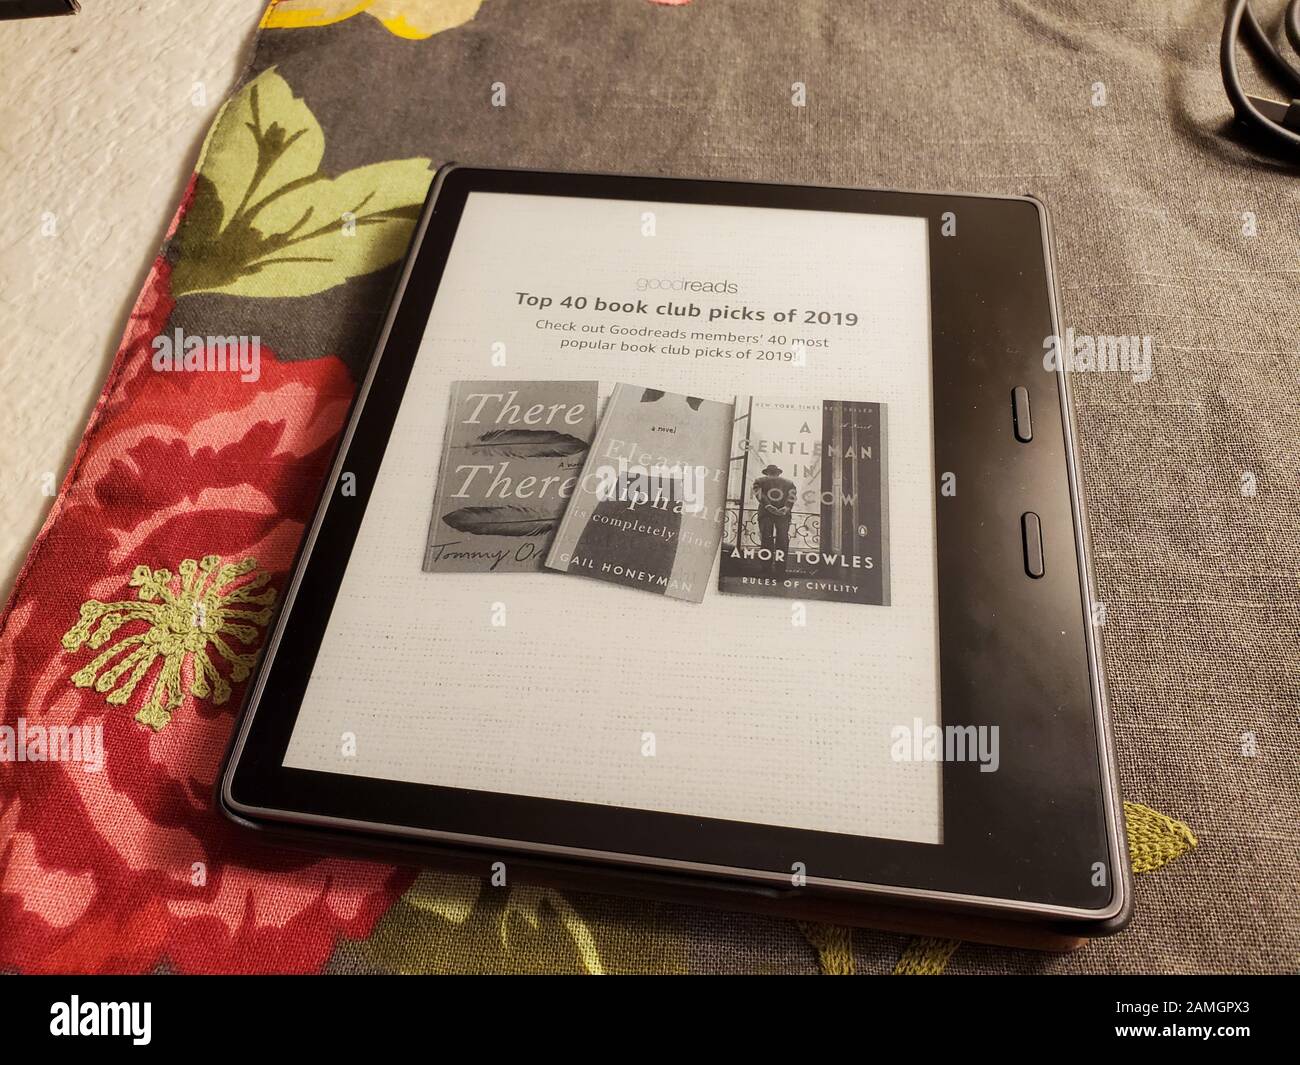 Close-up of latest generation Amazon Kindle Oasis e book reader with leather cover on floral print fabric, San Ramon, California, January 2, 2020. () Stock Photo